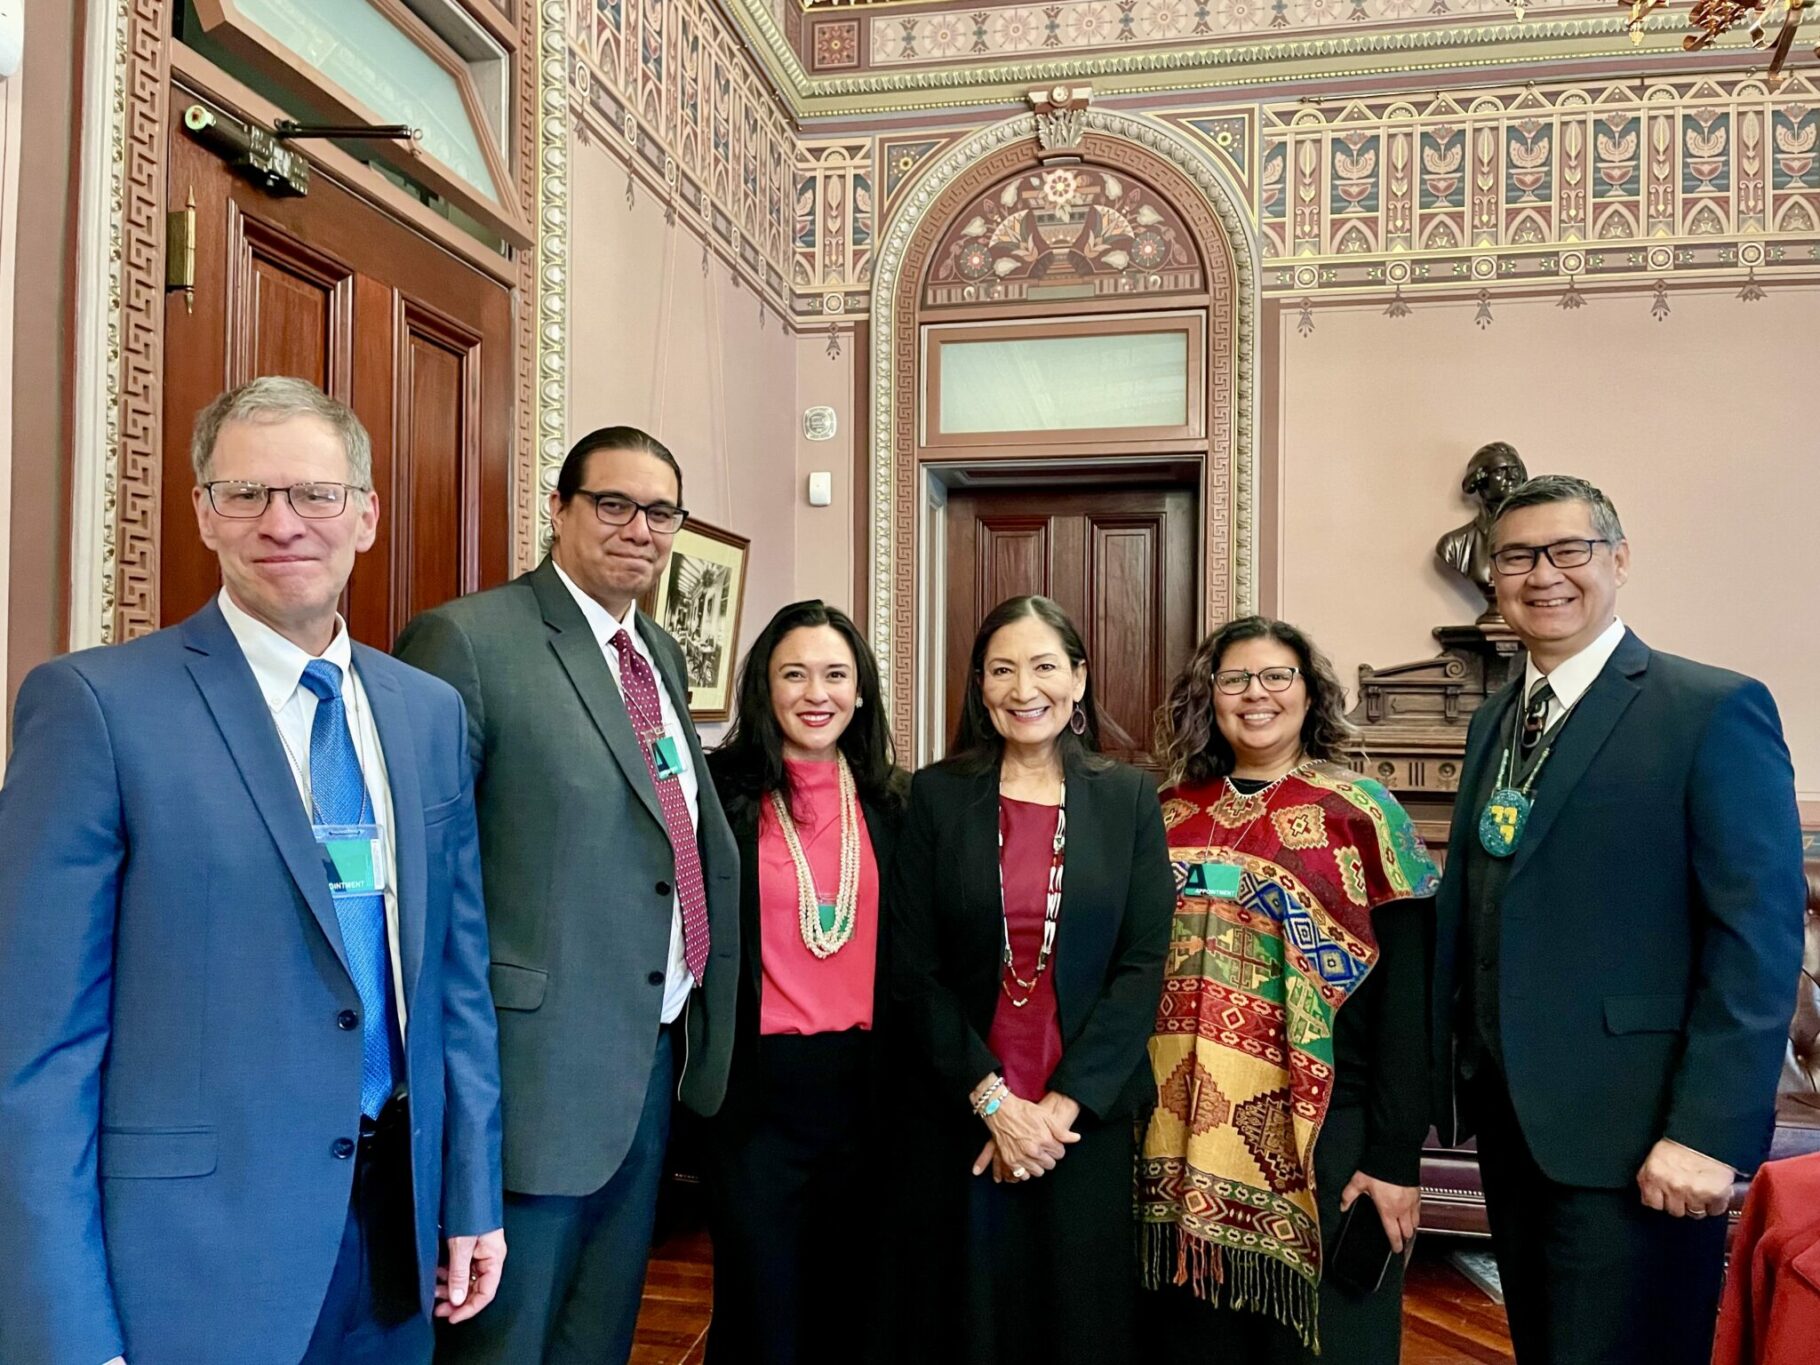 Six people in an ornate room smile into the camera. L–R: Kevin Walker, CEO of Northwest Area Foundation; Wizipan Garriott, Principal Deputy Assistant Secretary for Indian Affairs, U.S. Department of the Interior; Lauren Grattan, Mission Driven Finance; Secretary Deb Haaland, U.S. Department of the Interior; Rosa Cabrera, Chan Zuckerberg Initiative; Ted Piccolo, Mission Driven Finance